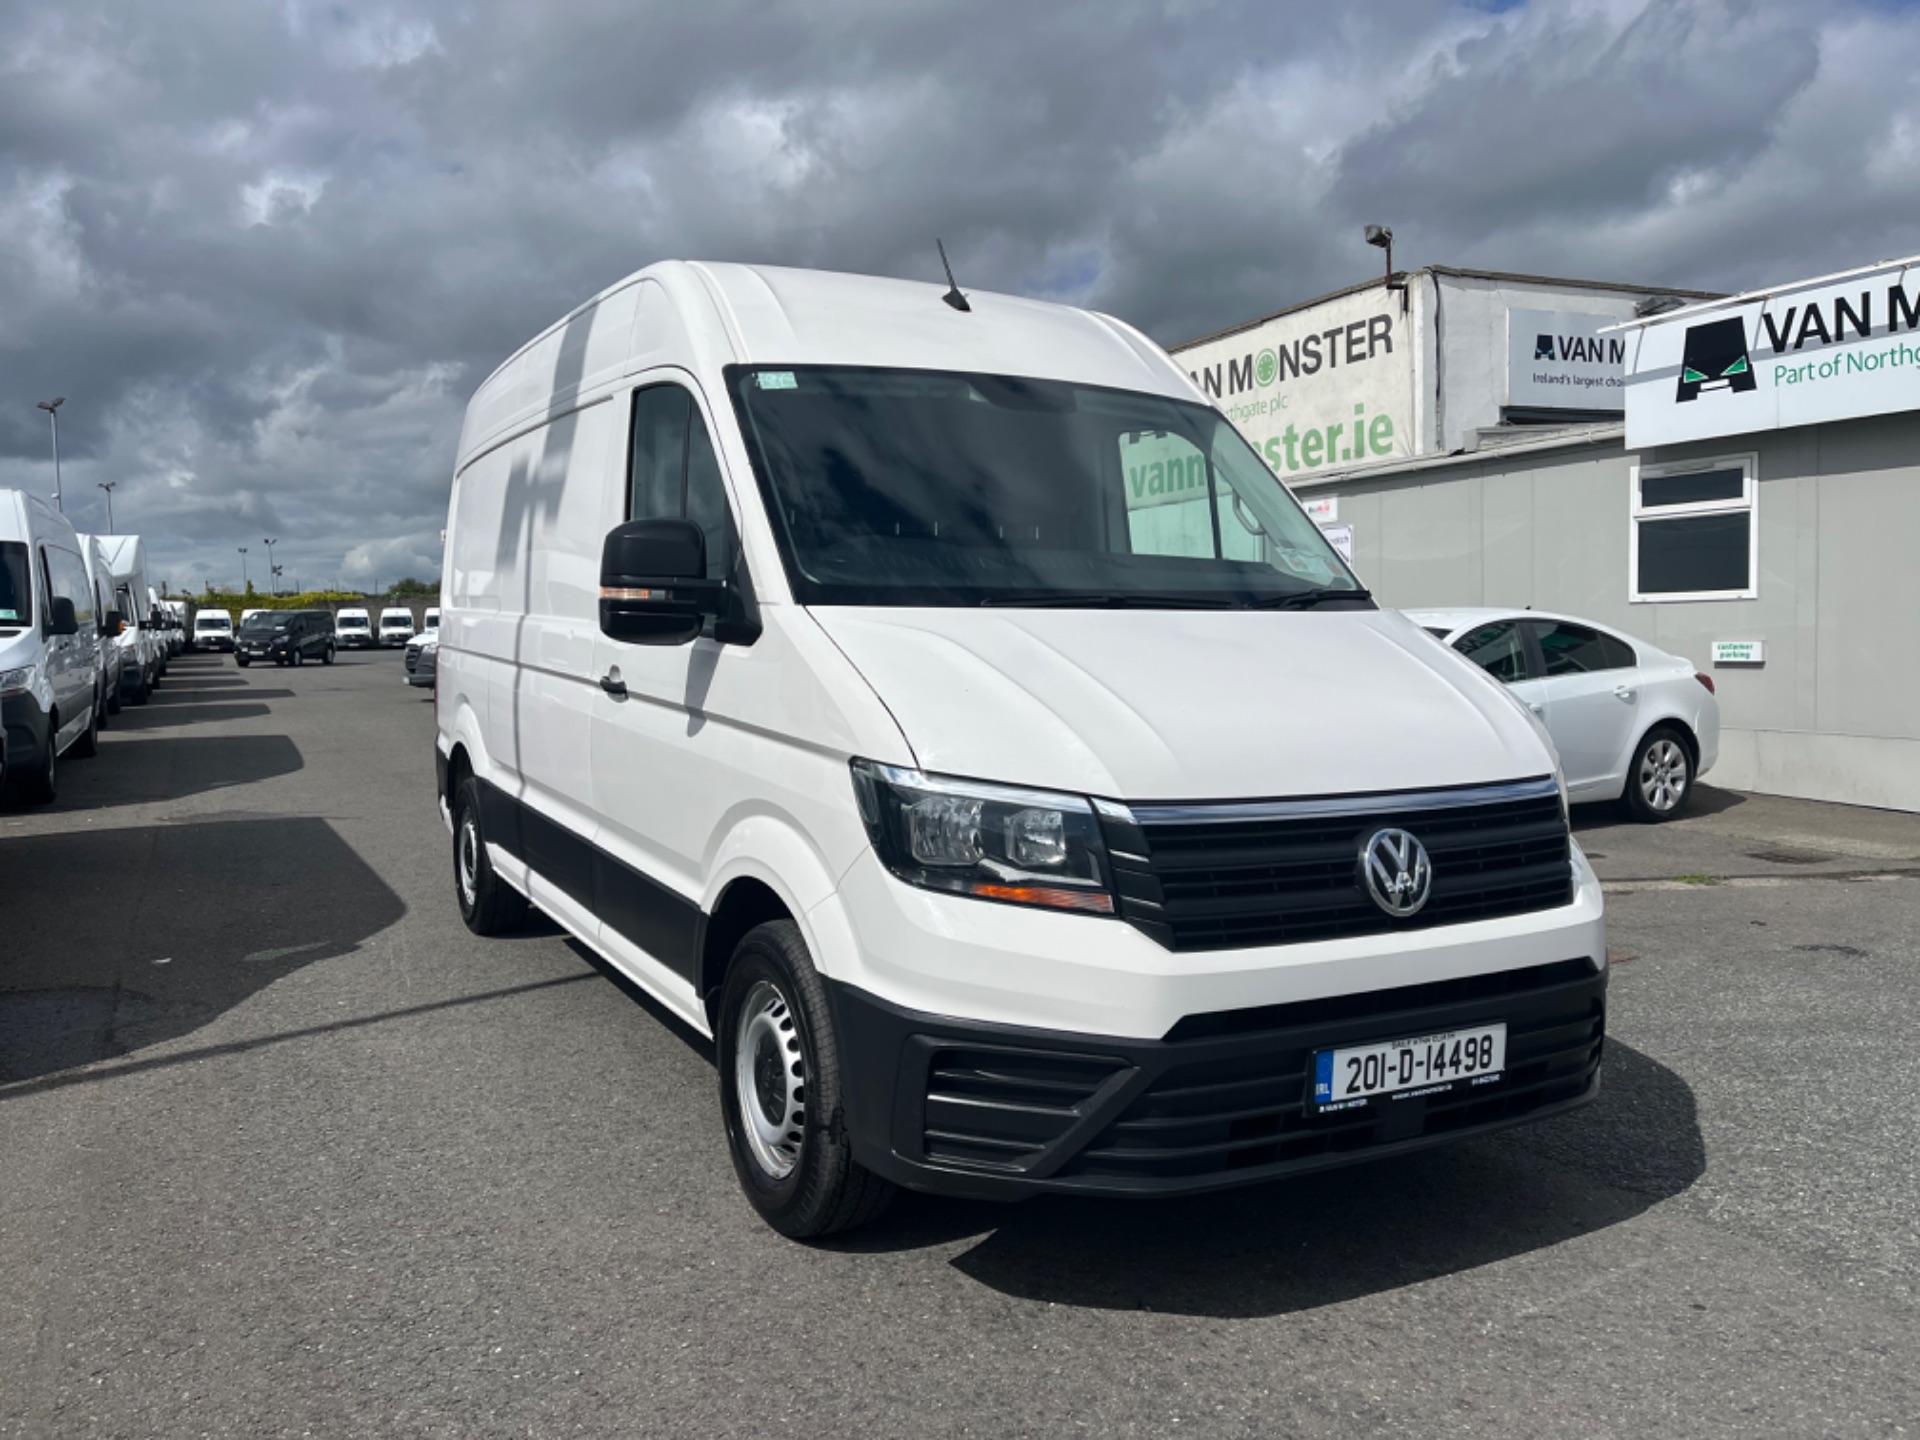 2020 Volkswagen Crafter 35 MWB 140HP M6F 5DR (201D14498)